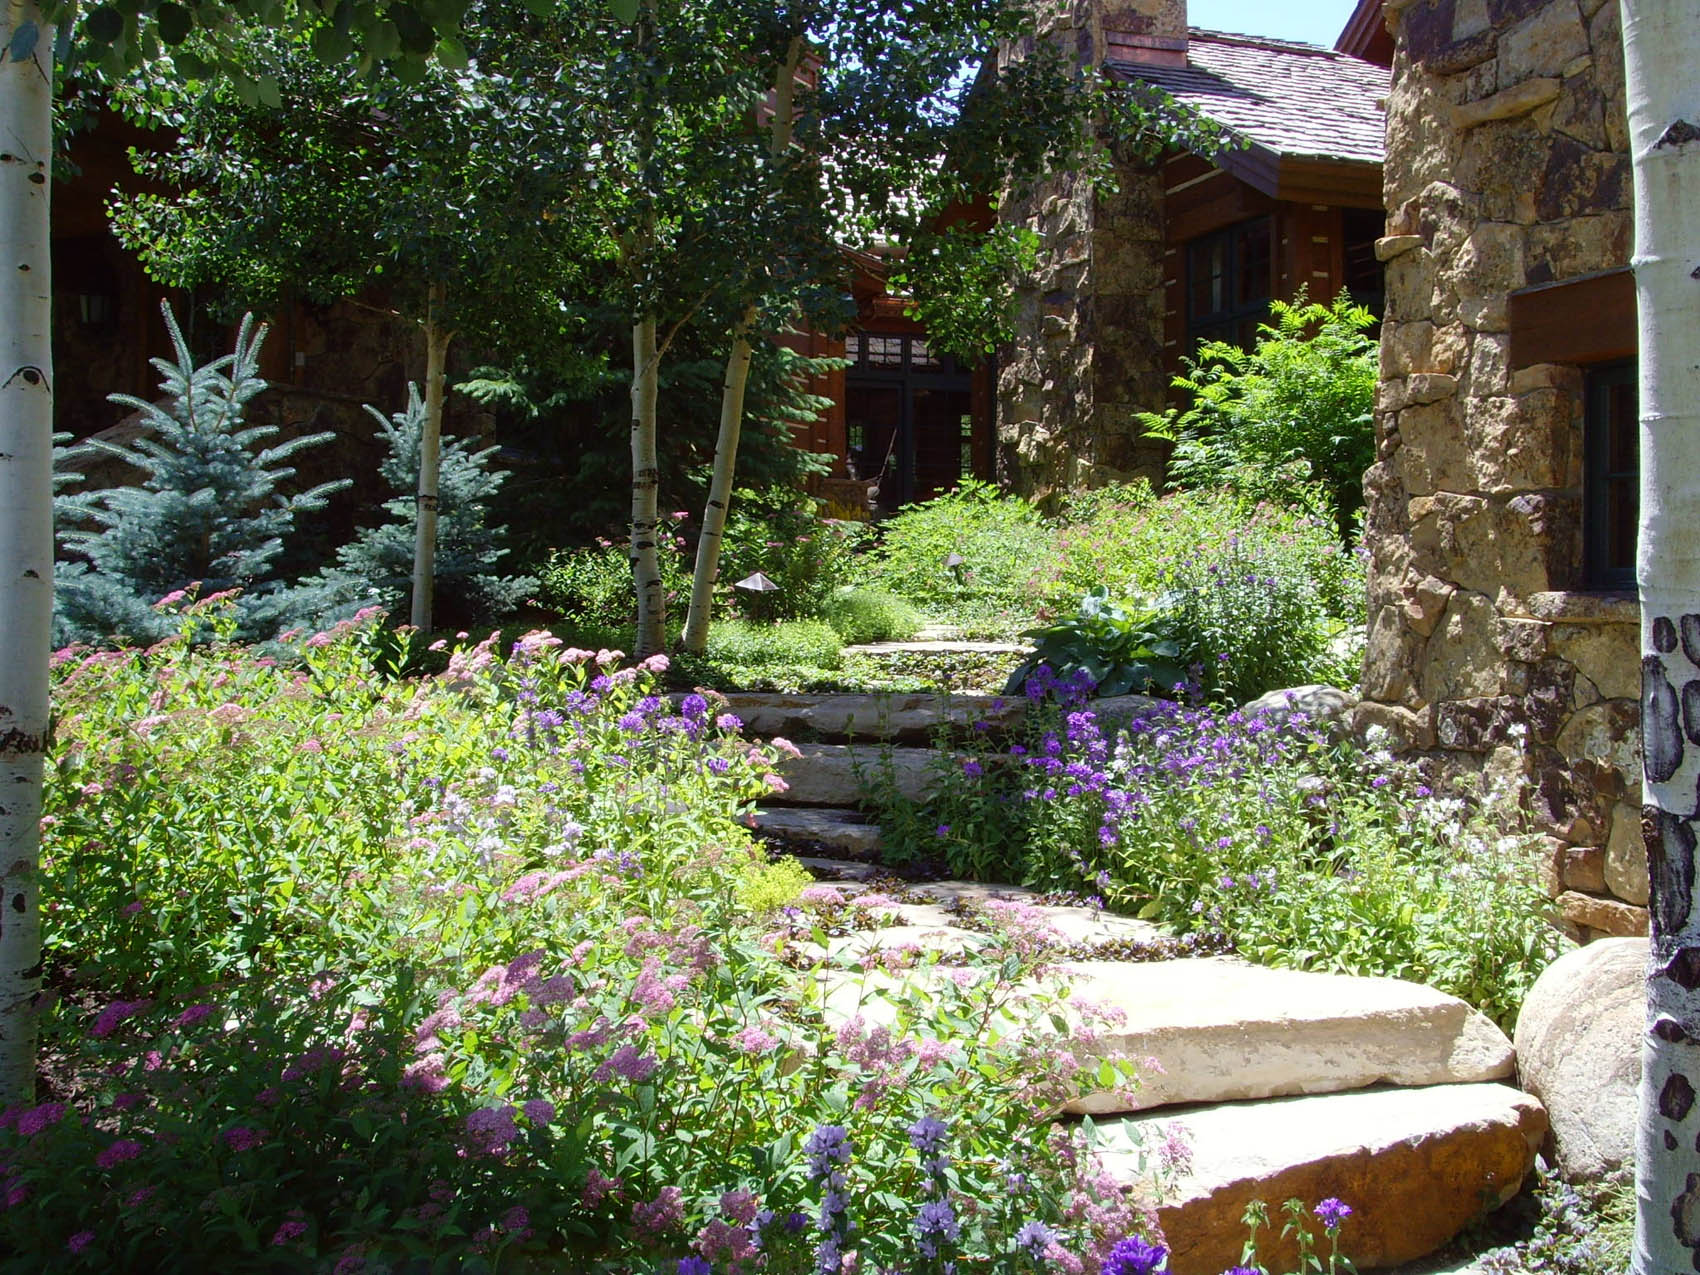 A lush garden with stone steps leading to a house. Flowers bloom vibrantly among green shrubs under a clear, sunny sky. Trees and foliage frame the setting.